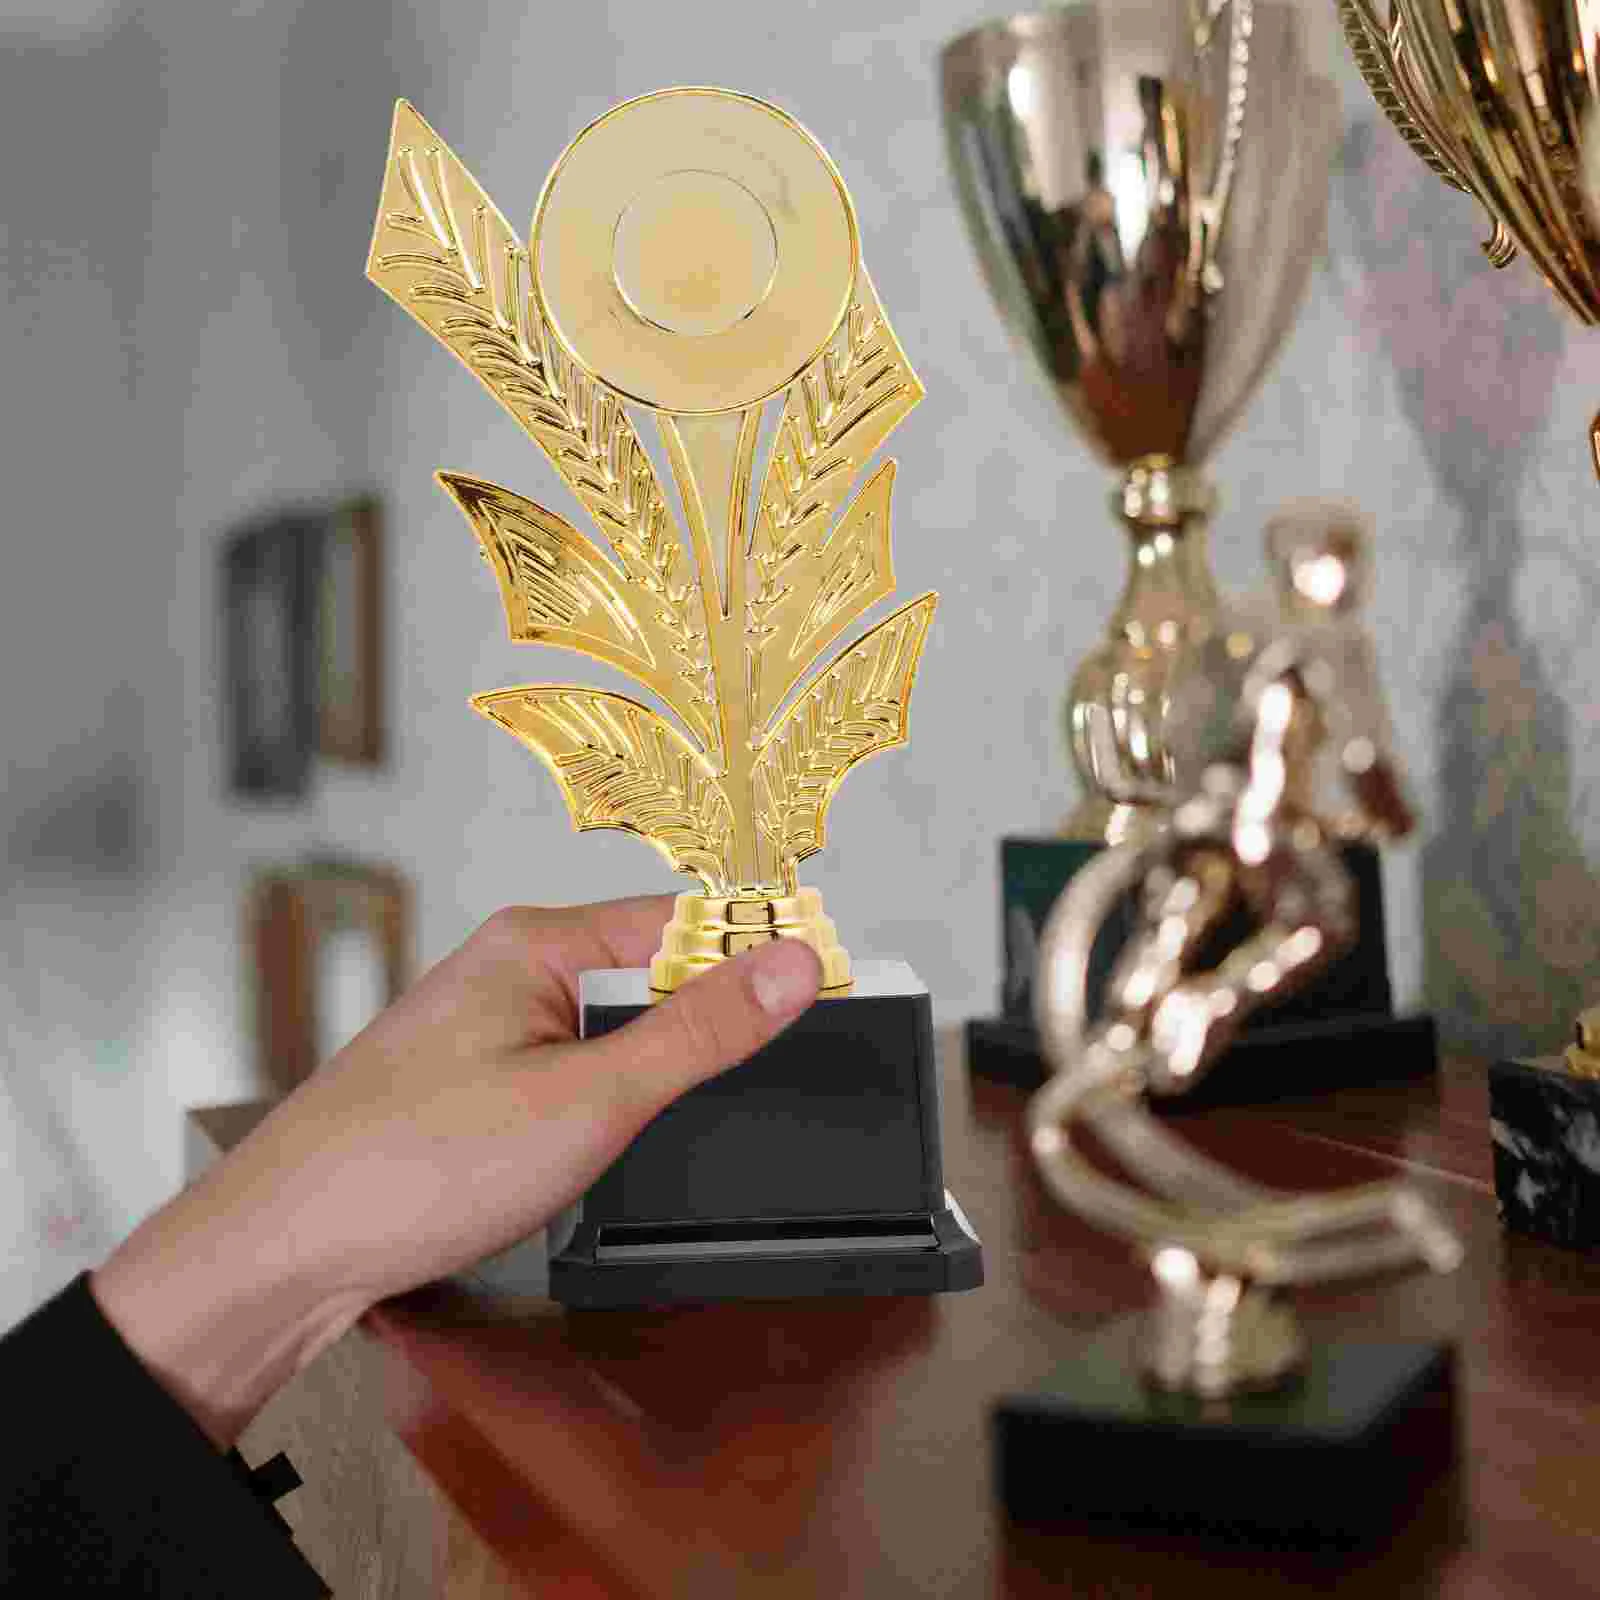 

Children's Trophy Plastic Award Small Trophies for Kids Awards Gold Props Perlite Plants Reward Competitions Winning Prizes